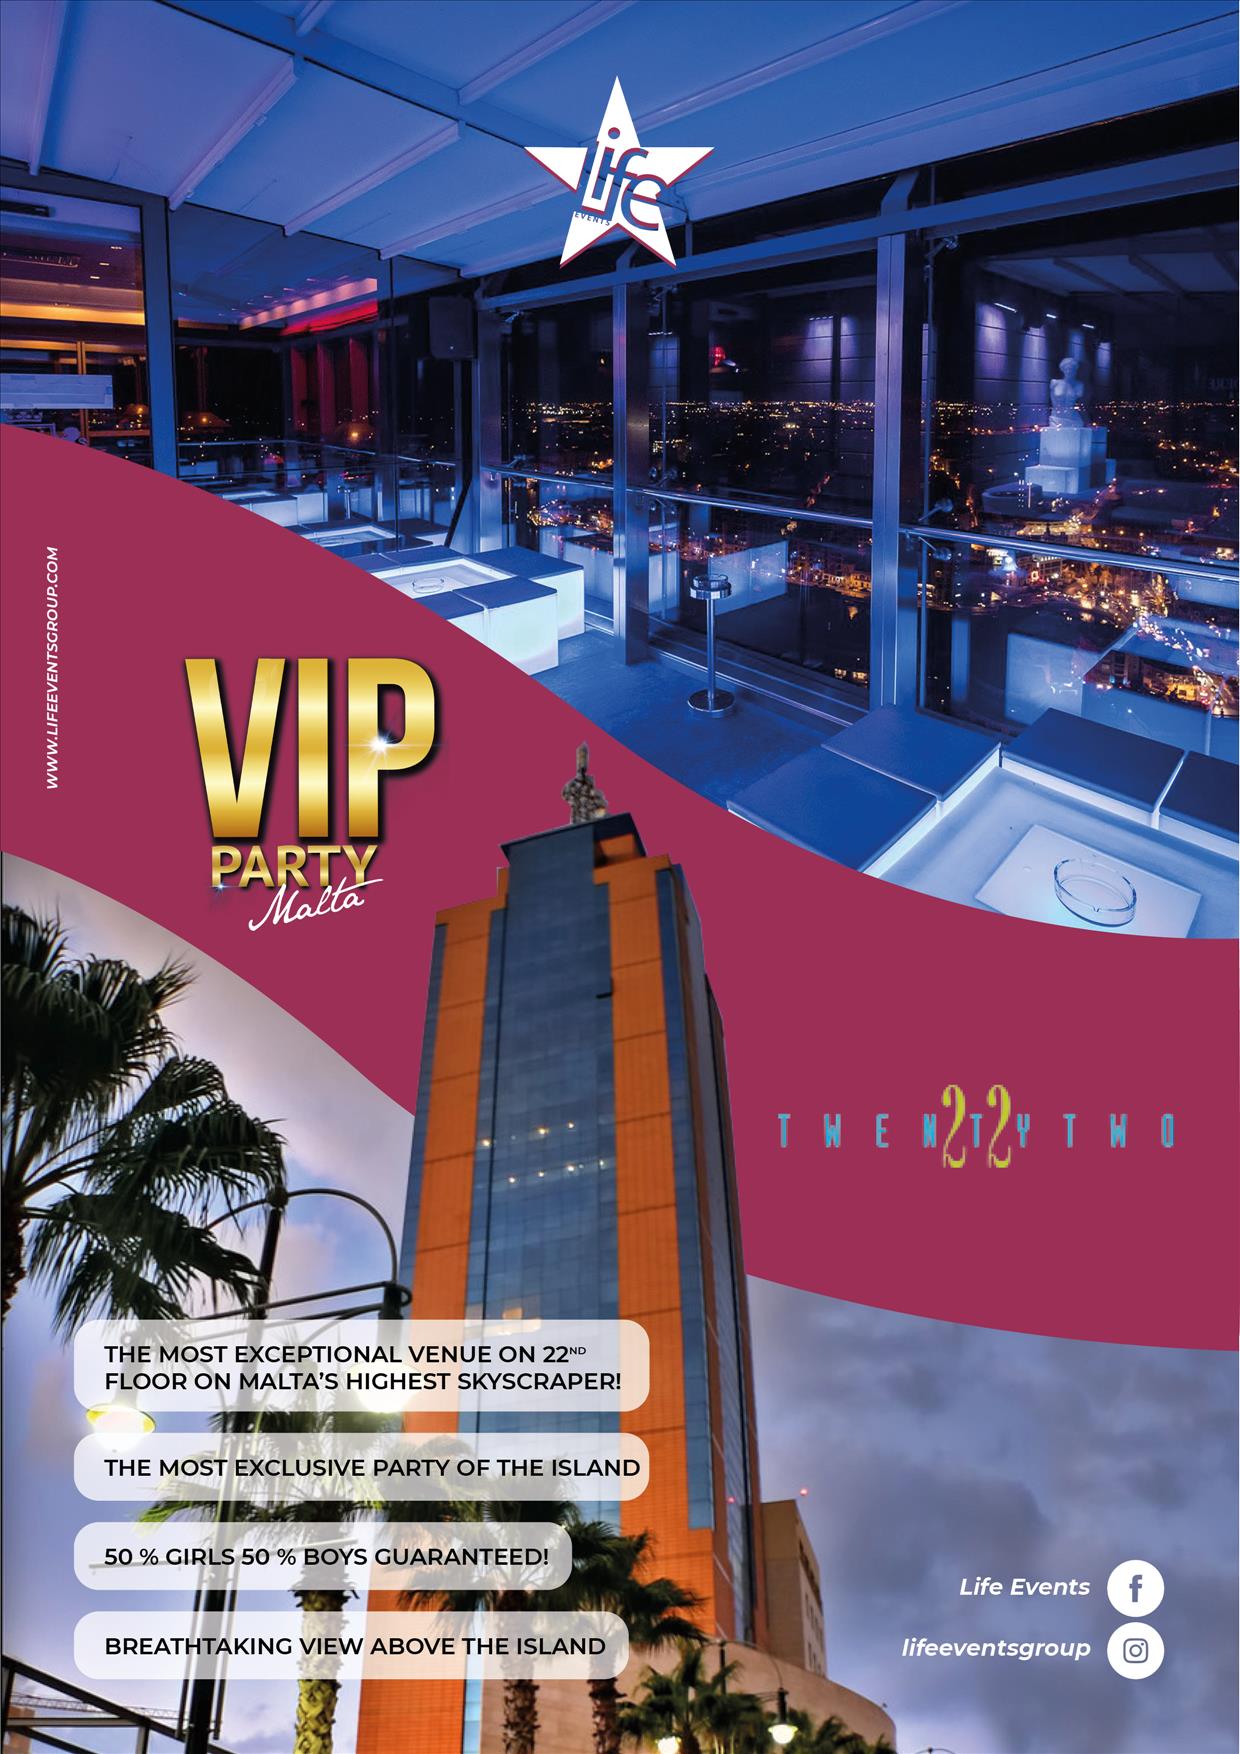 VIP Party Malta by Life Events poster